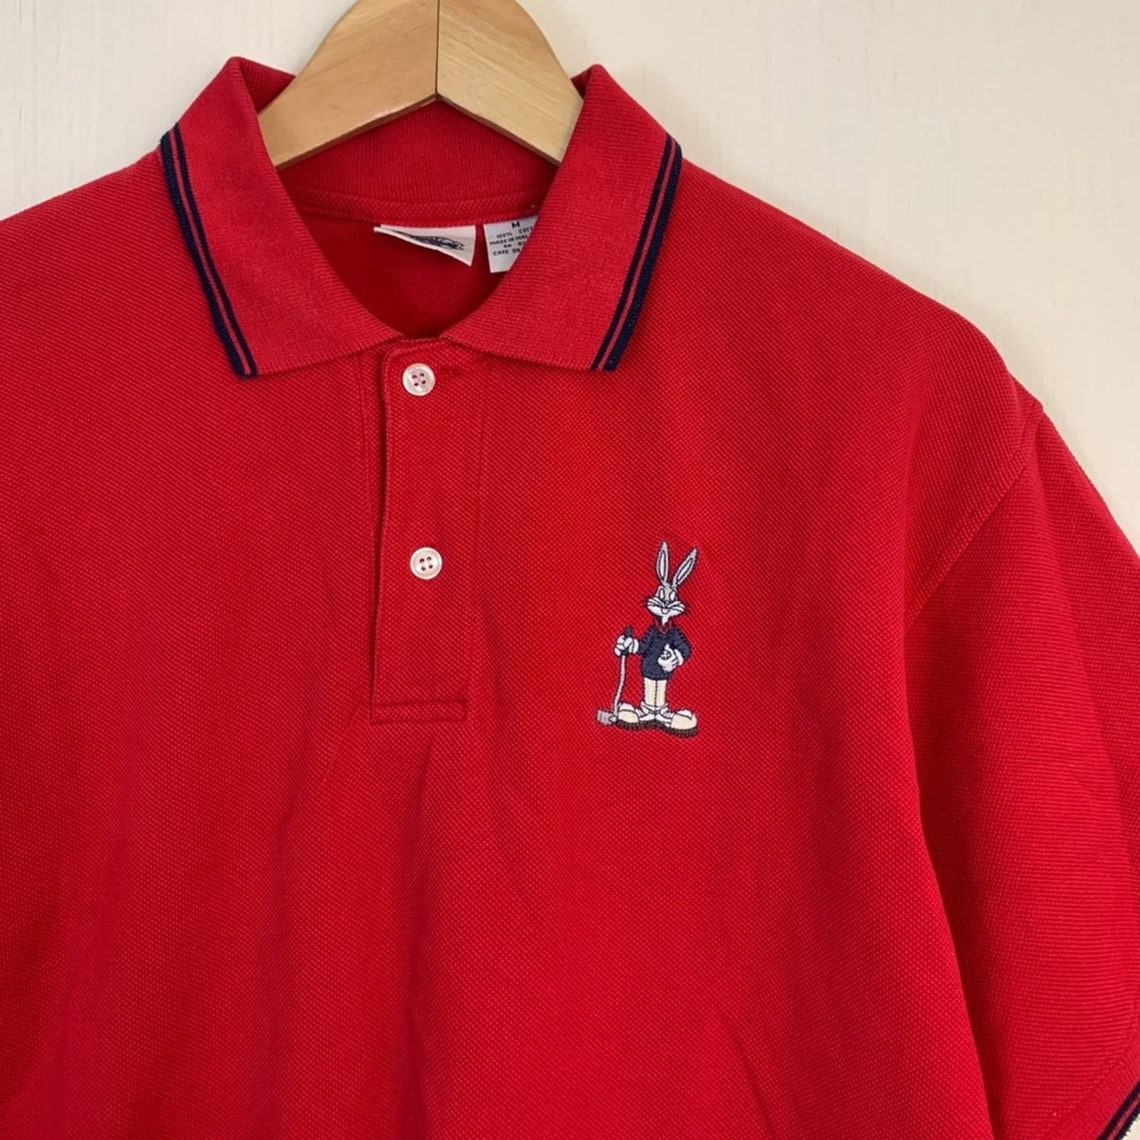 Vintage Looney Toons Buggs Bunny Polo Shirt - Etsy